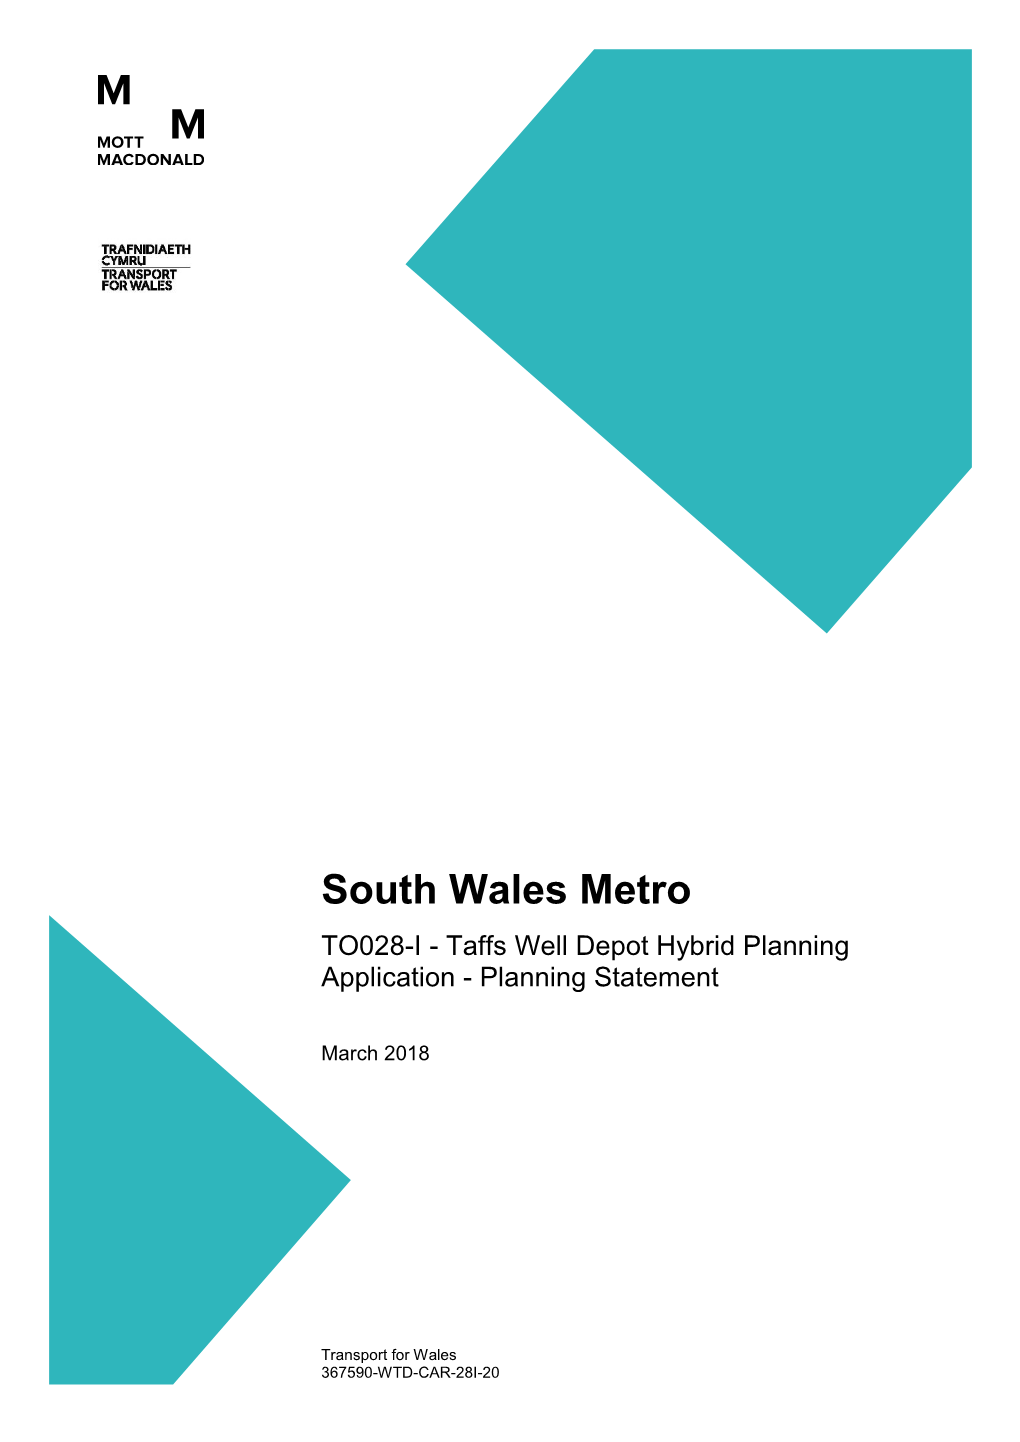 South Wales Metro TO028-I - Taffs Well Depot Hybrid Planning Application - Planning Statement